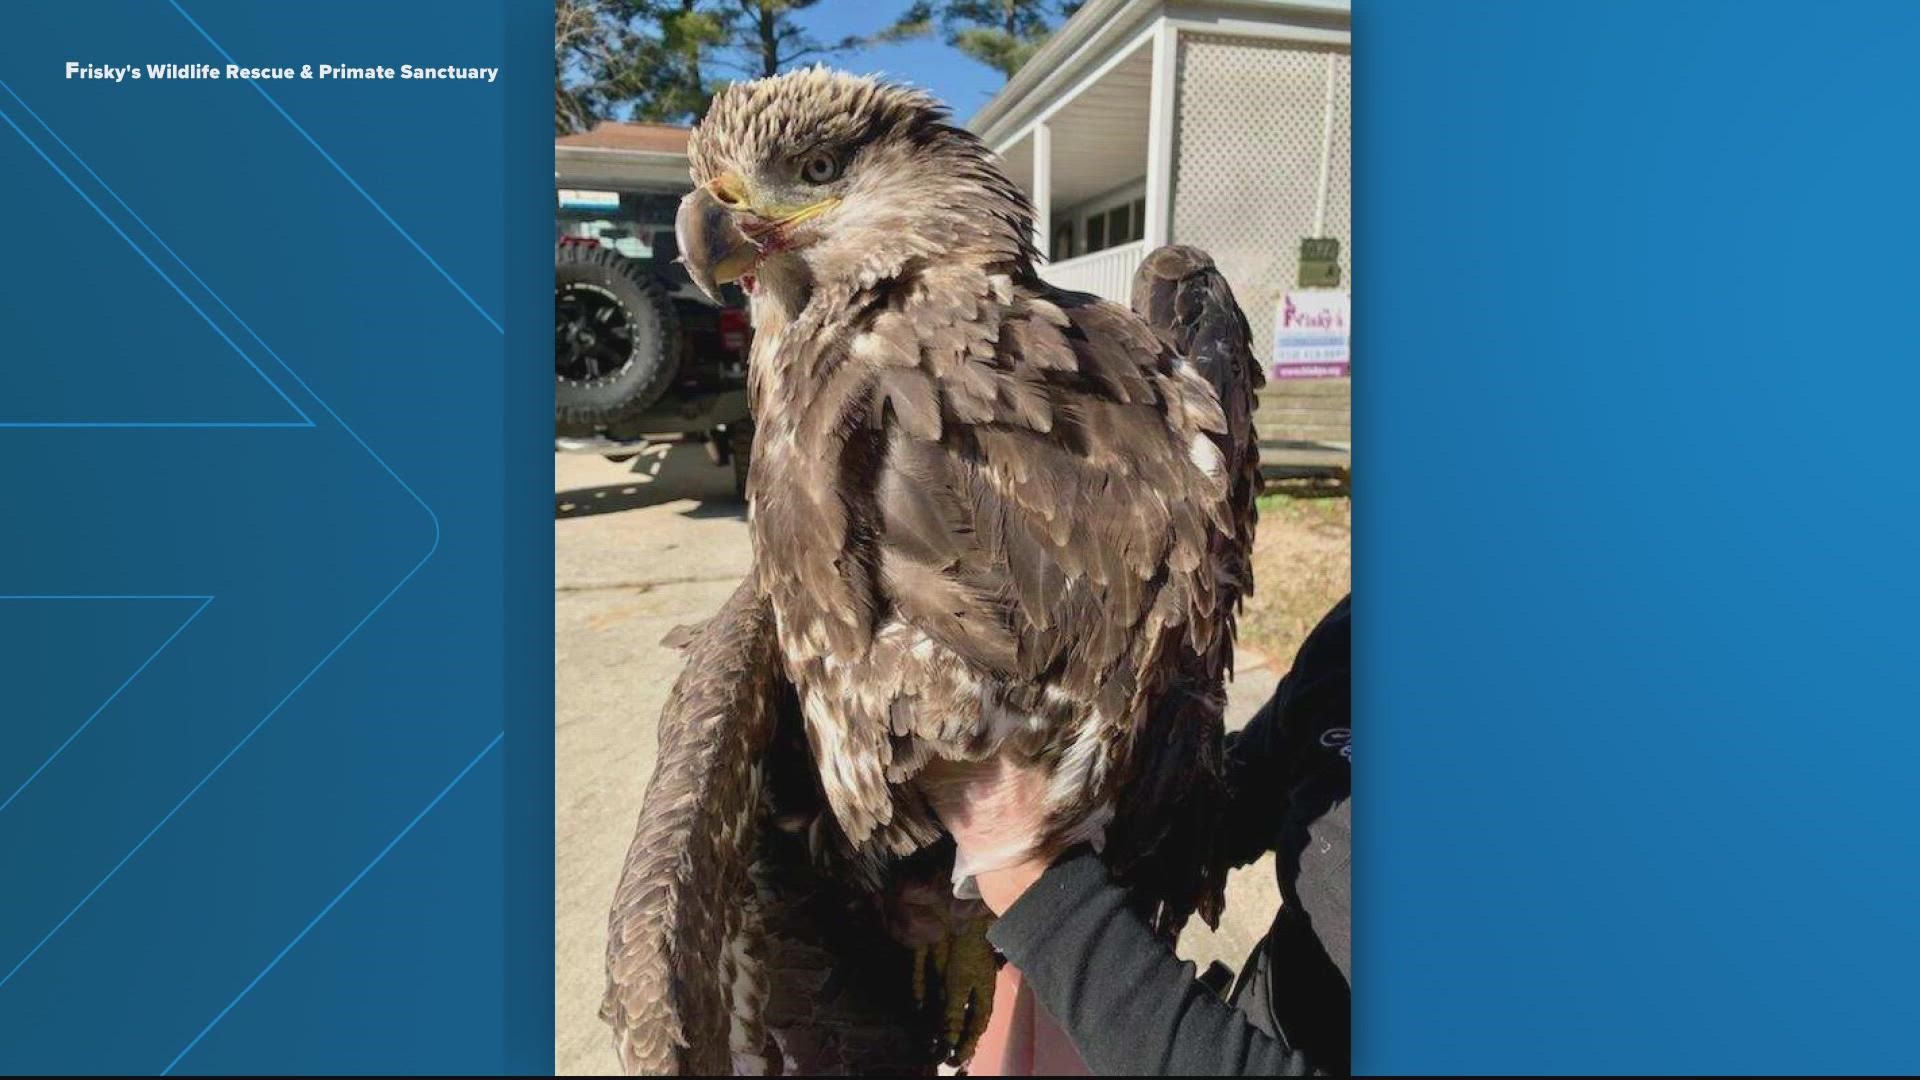 A spokesperson from Howard County tells WUSA9 that the bird was found after it was hit by a car.